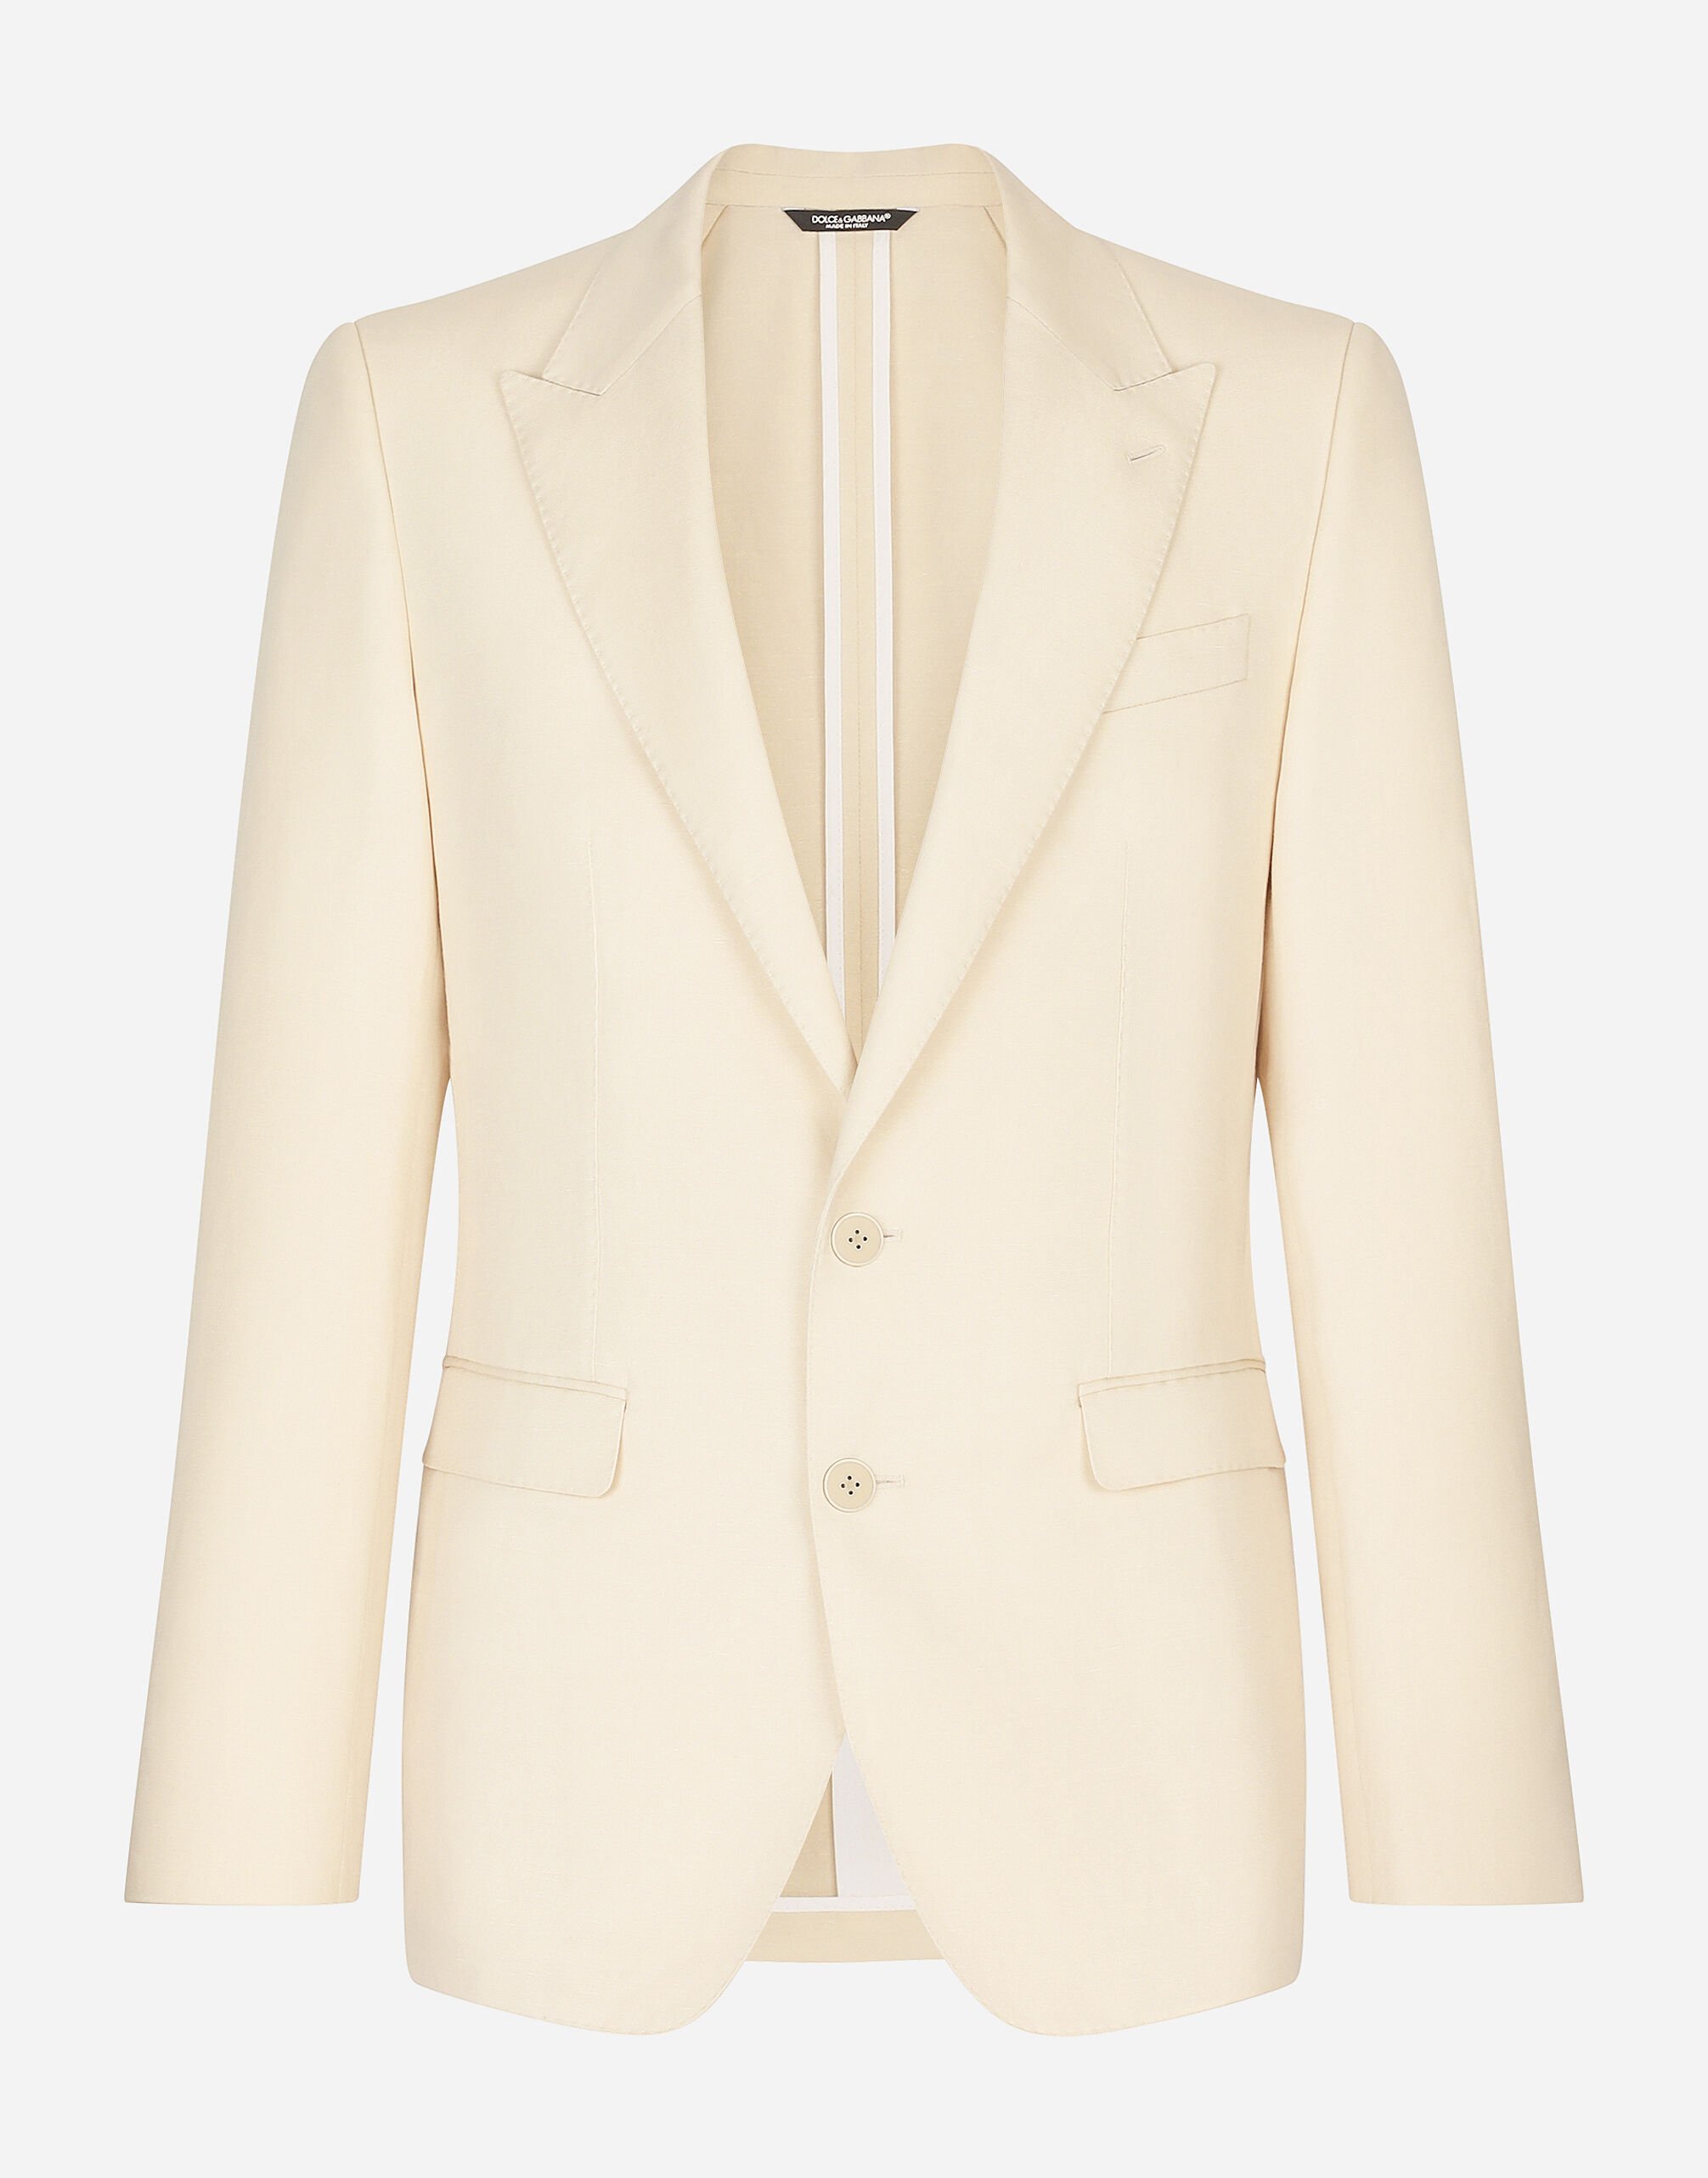 Dolce & Gabbana Single-breasted Taormina jacket in linen, cotton and silk Black A80397AO602